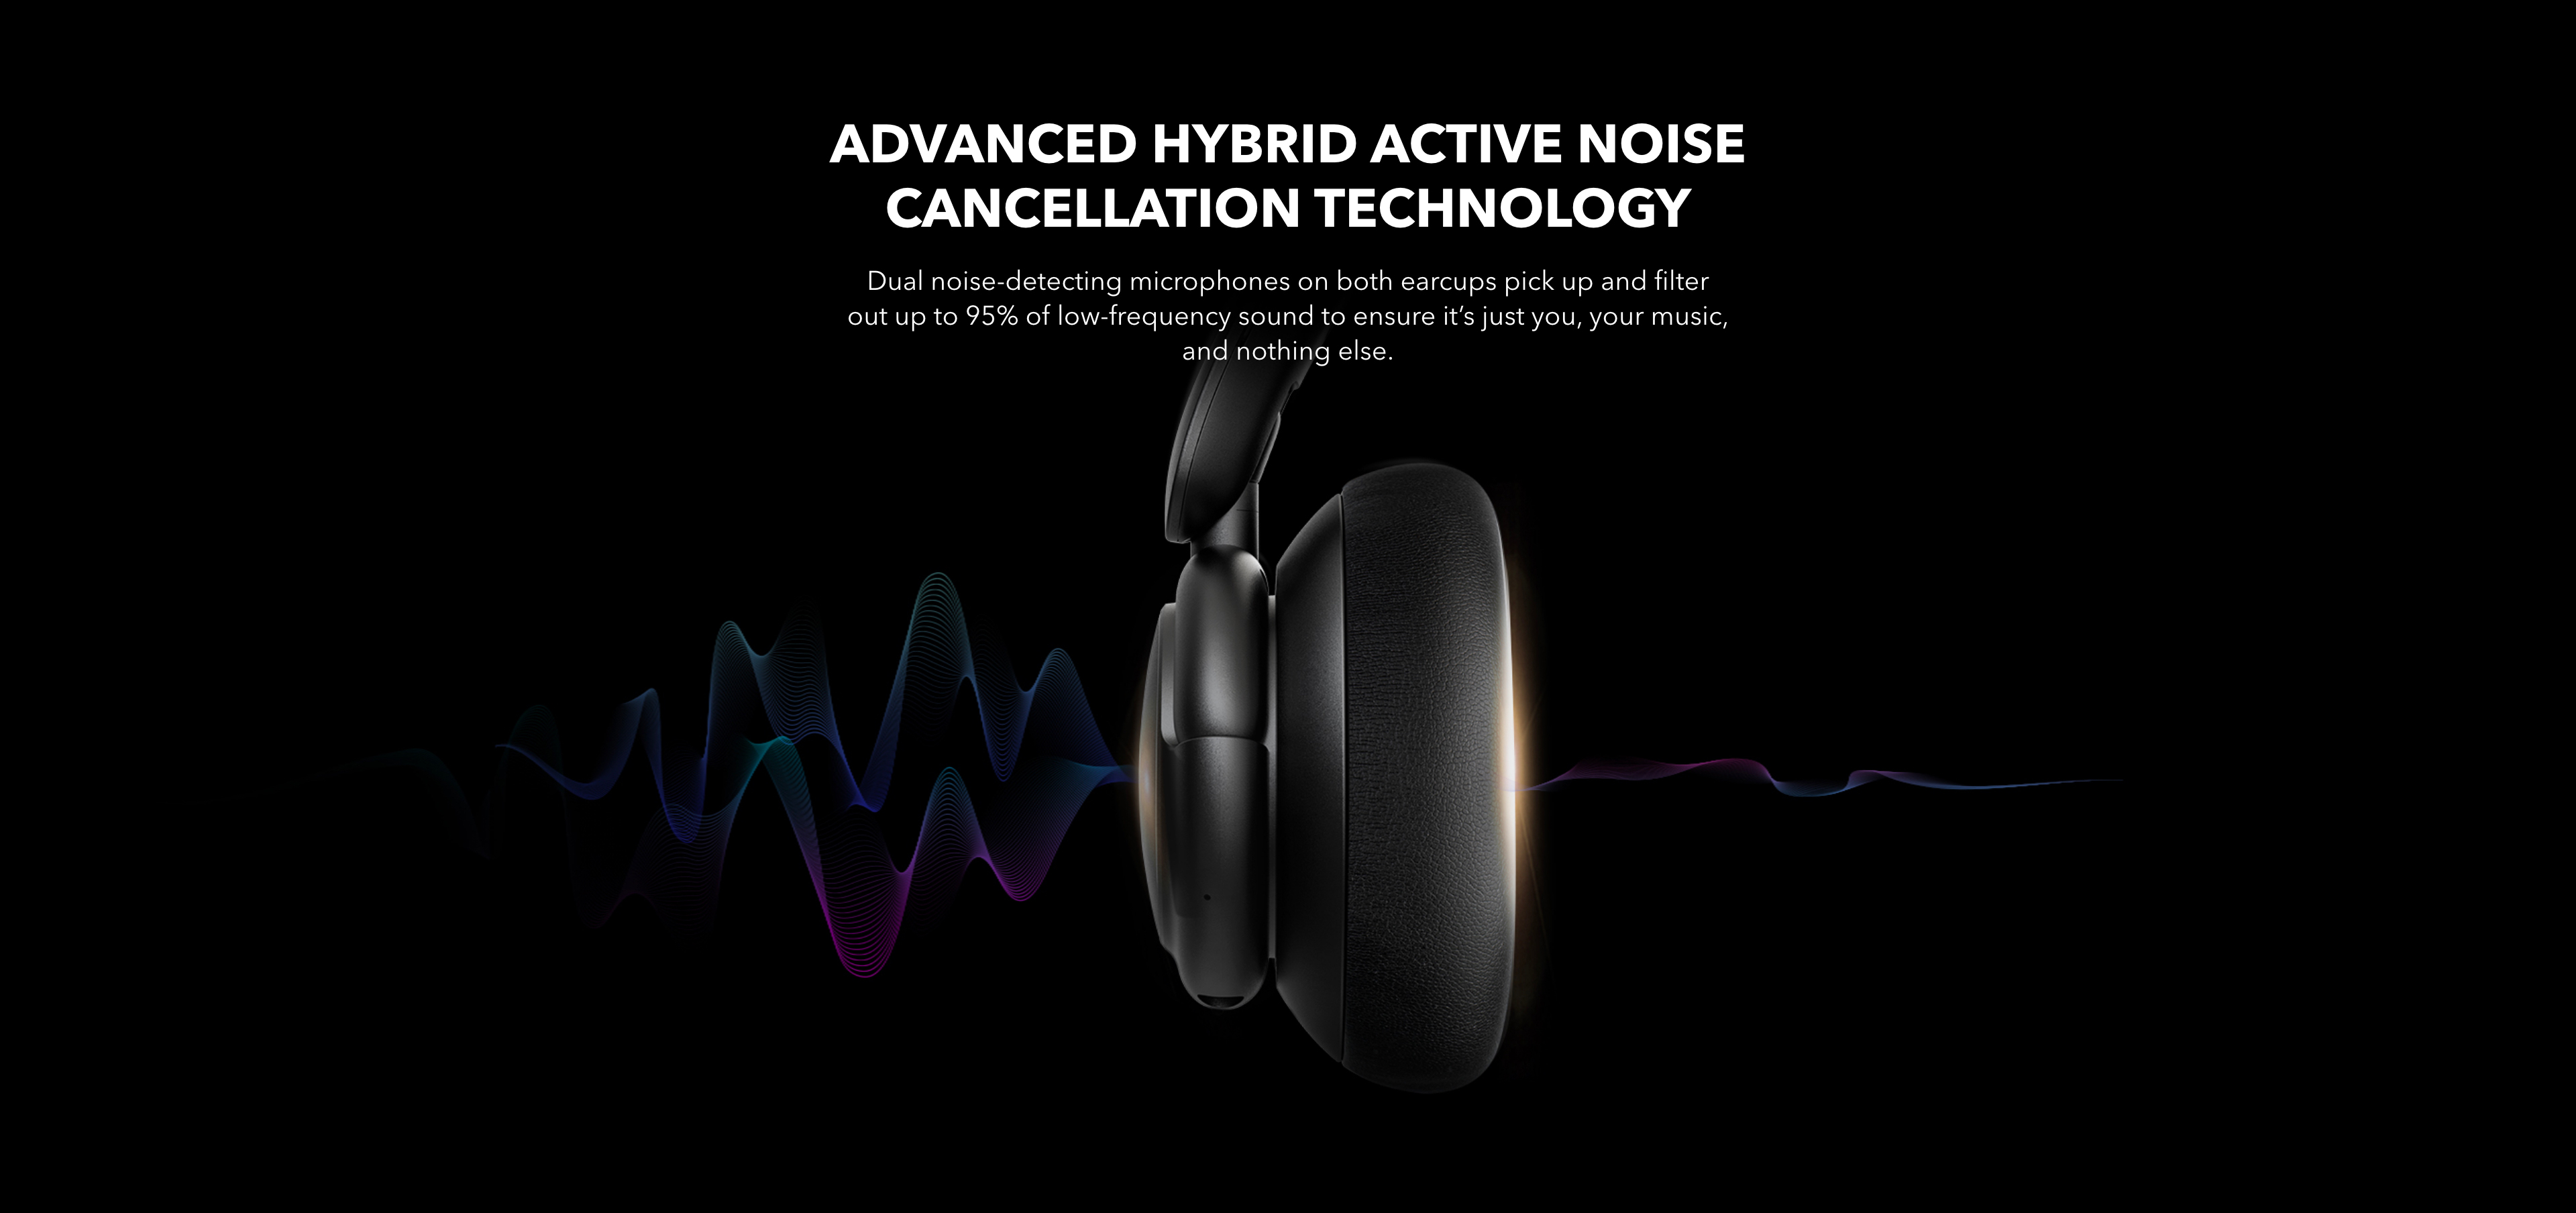 Advanced Hybrid Active Noise Cancellation Technology Dual noise-detecting microphones on both earcups pick up and filter out up to 95% of low-frequency sound to ensure it’s just you, your music, and nothing else.